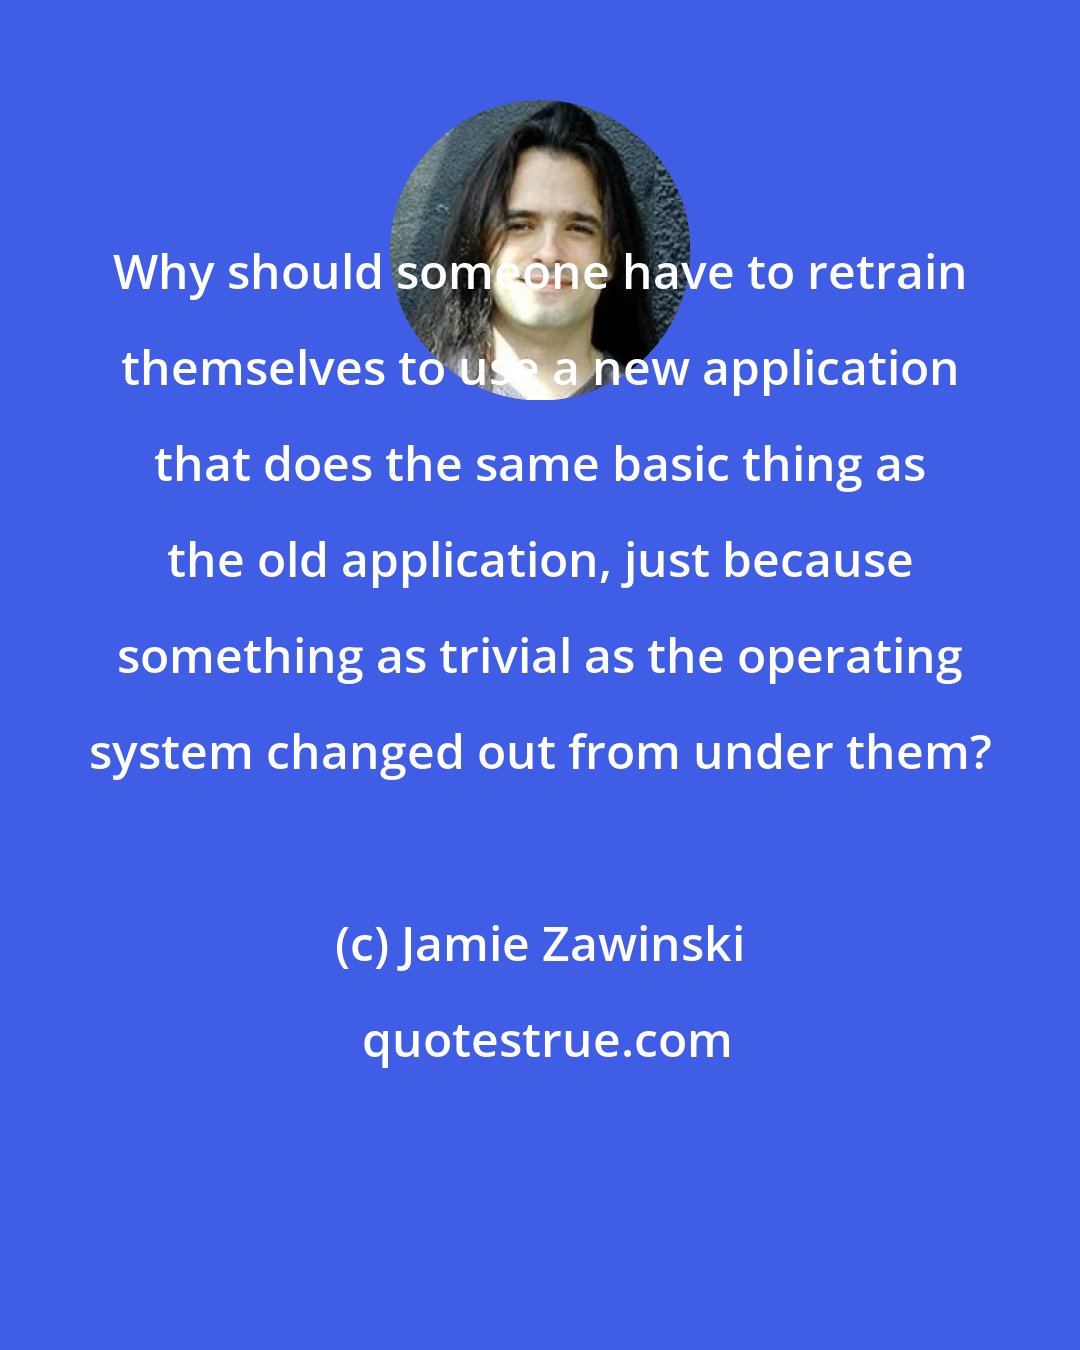 Jamie Zawinski: Why should someone have to retrain themselves to use a new application that does the same basic thing as the old application, just because something as trivial as the operating system changed out from under them?